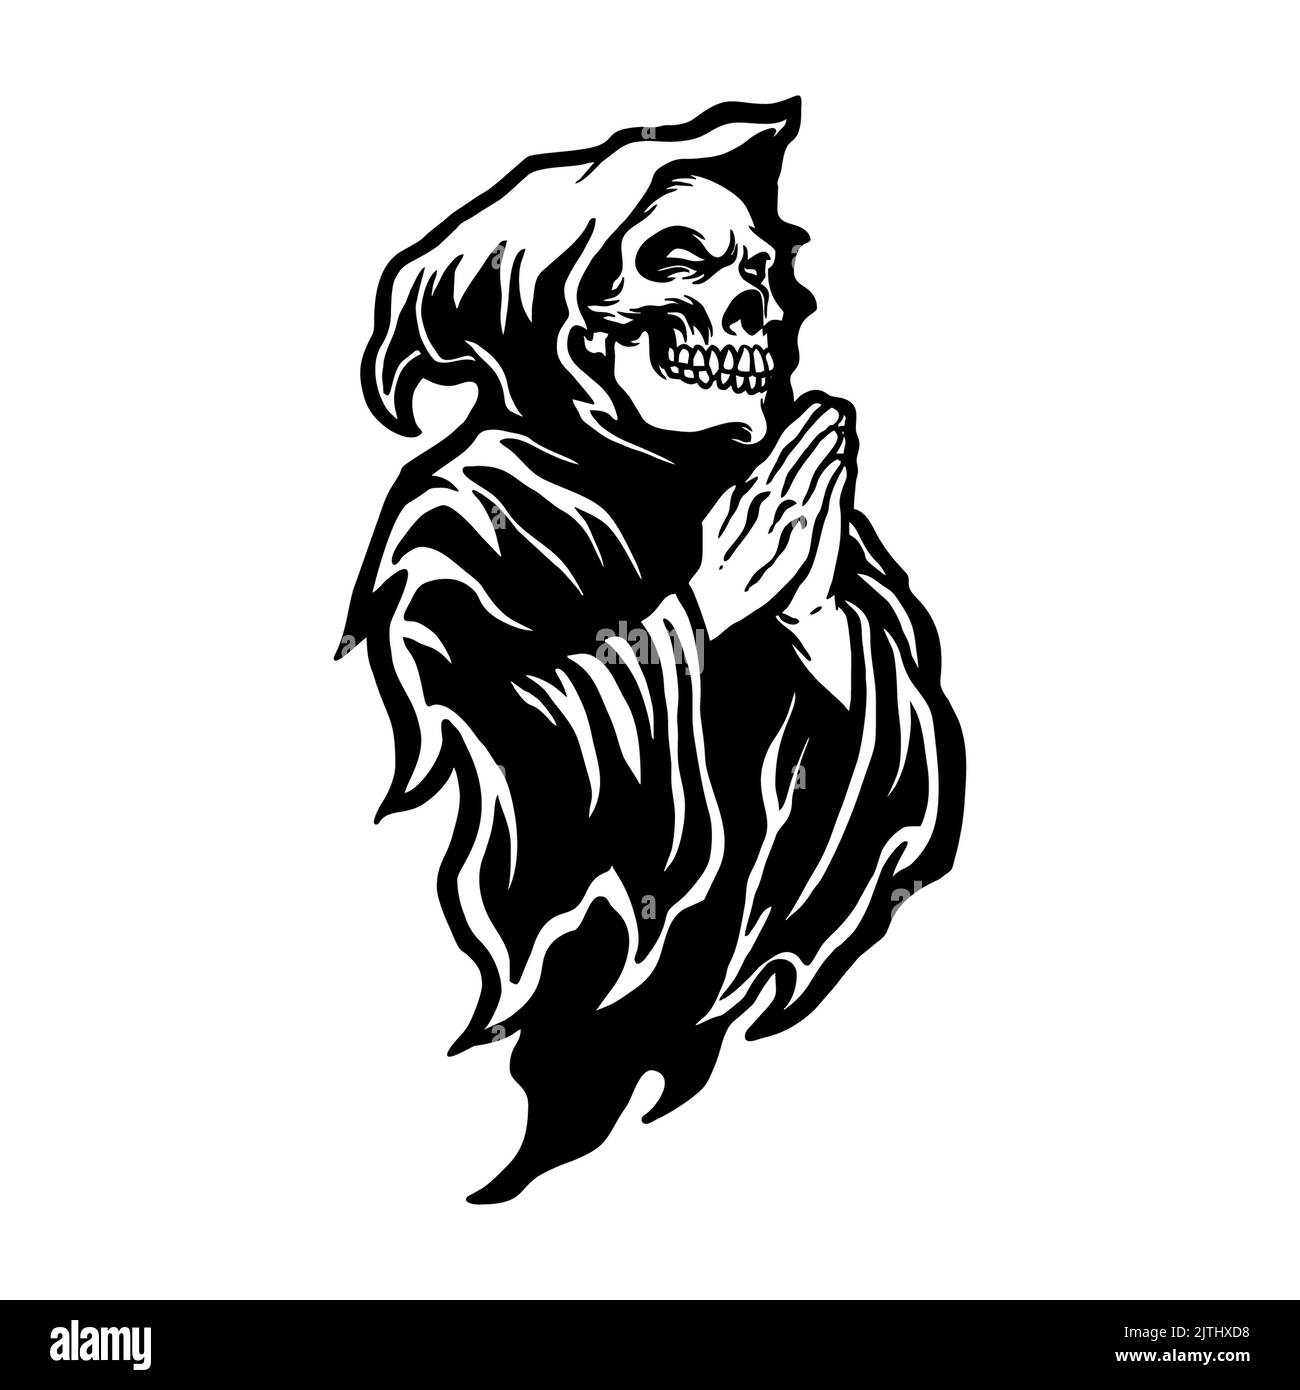 Death Grim Reaper Silhouette ClipArt Vector illustrations for your work Logo, mascot merchandise t-shirt, stickers and Label designs, poster, greeting Stock Photo